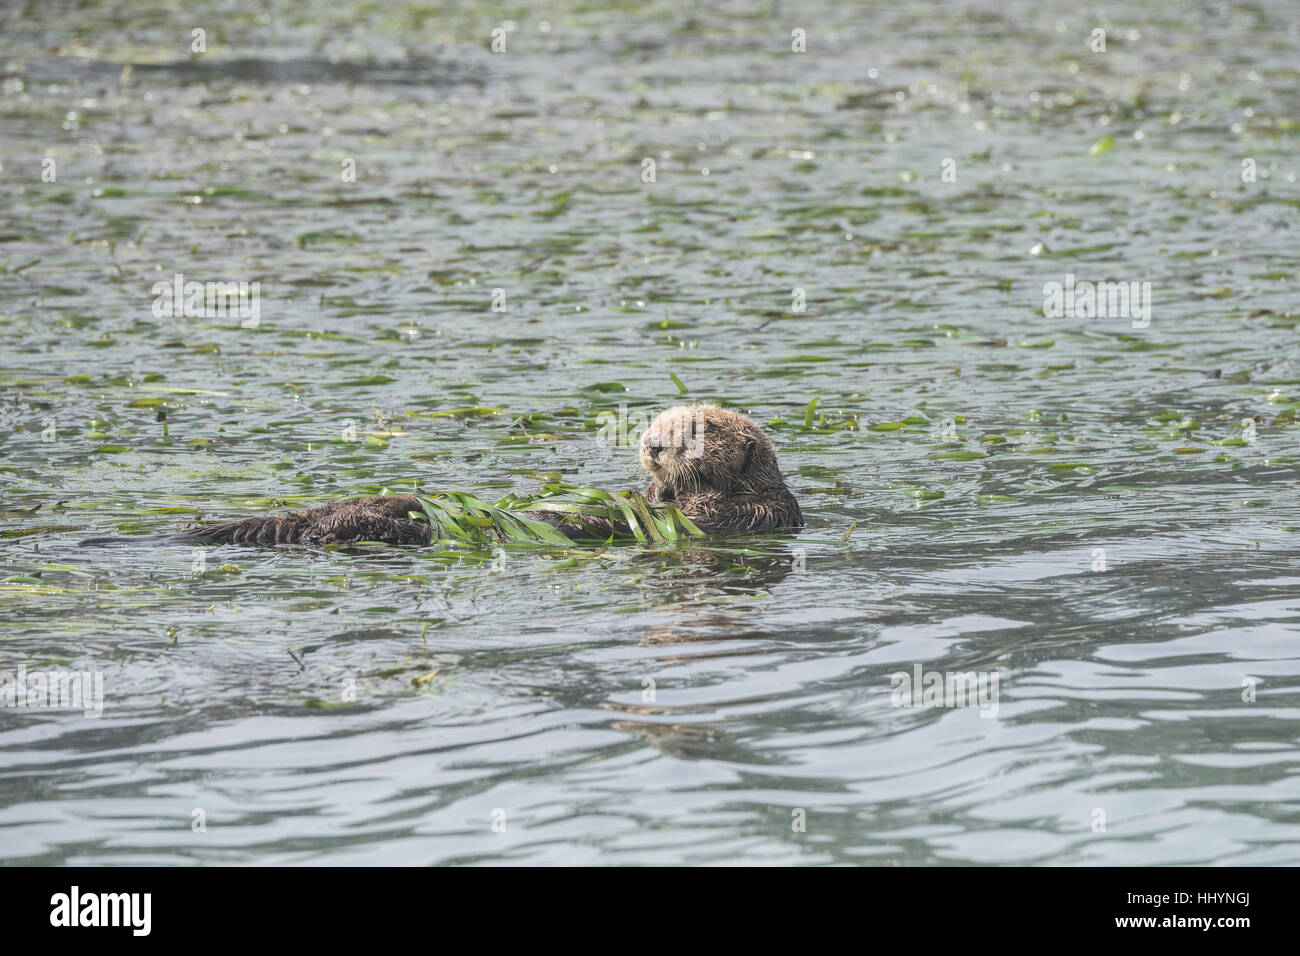 California sea otter, Enhydra lutris nereis, female with nose scarred by bites from male during mating, resting while wrapped in eelgrass, California Stock Photo